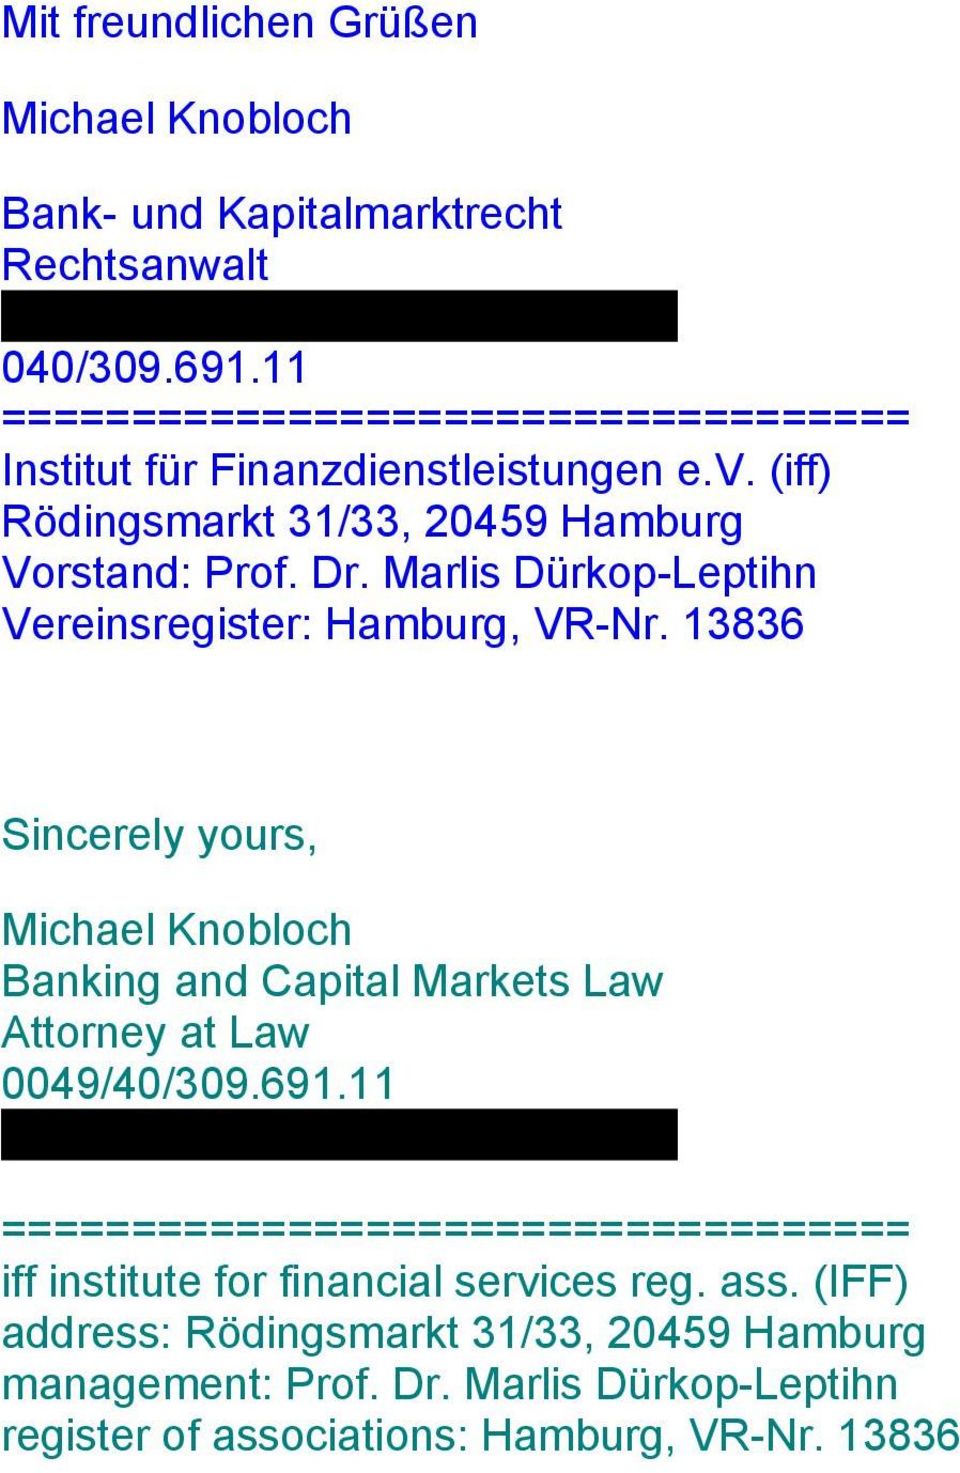 Marlis Dürkop-Leptihn Vereinsregister: Hamburg, VR-Nr. 13836 Sincerely yours, Michael Knobloch Banking and Capital Markets Law Attorney at Law 0049/40/309.691.11 michael.